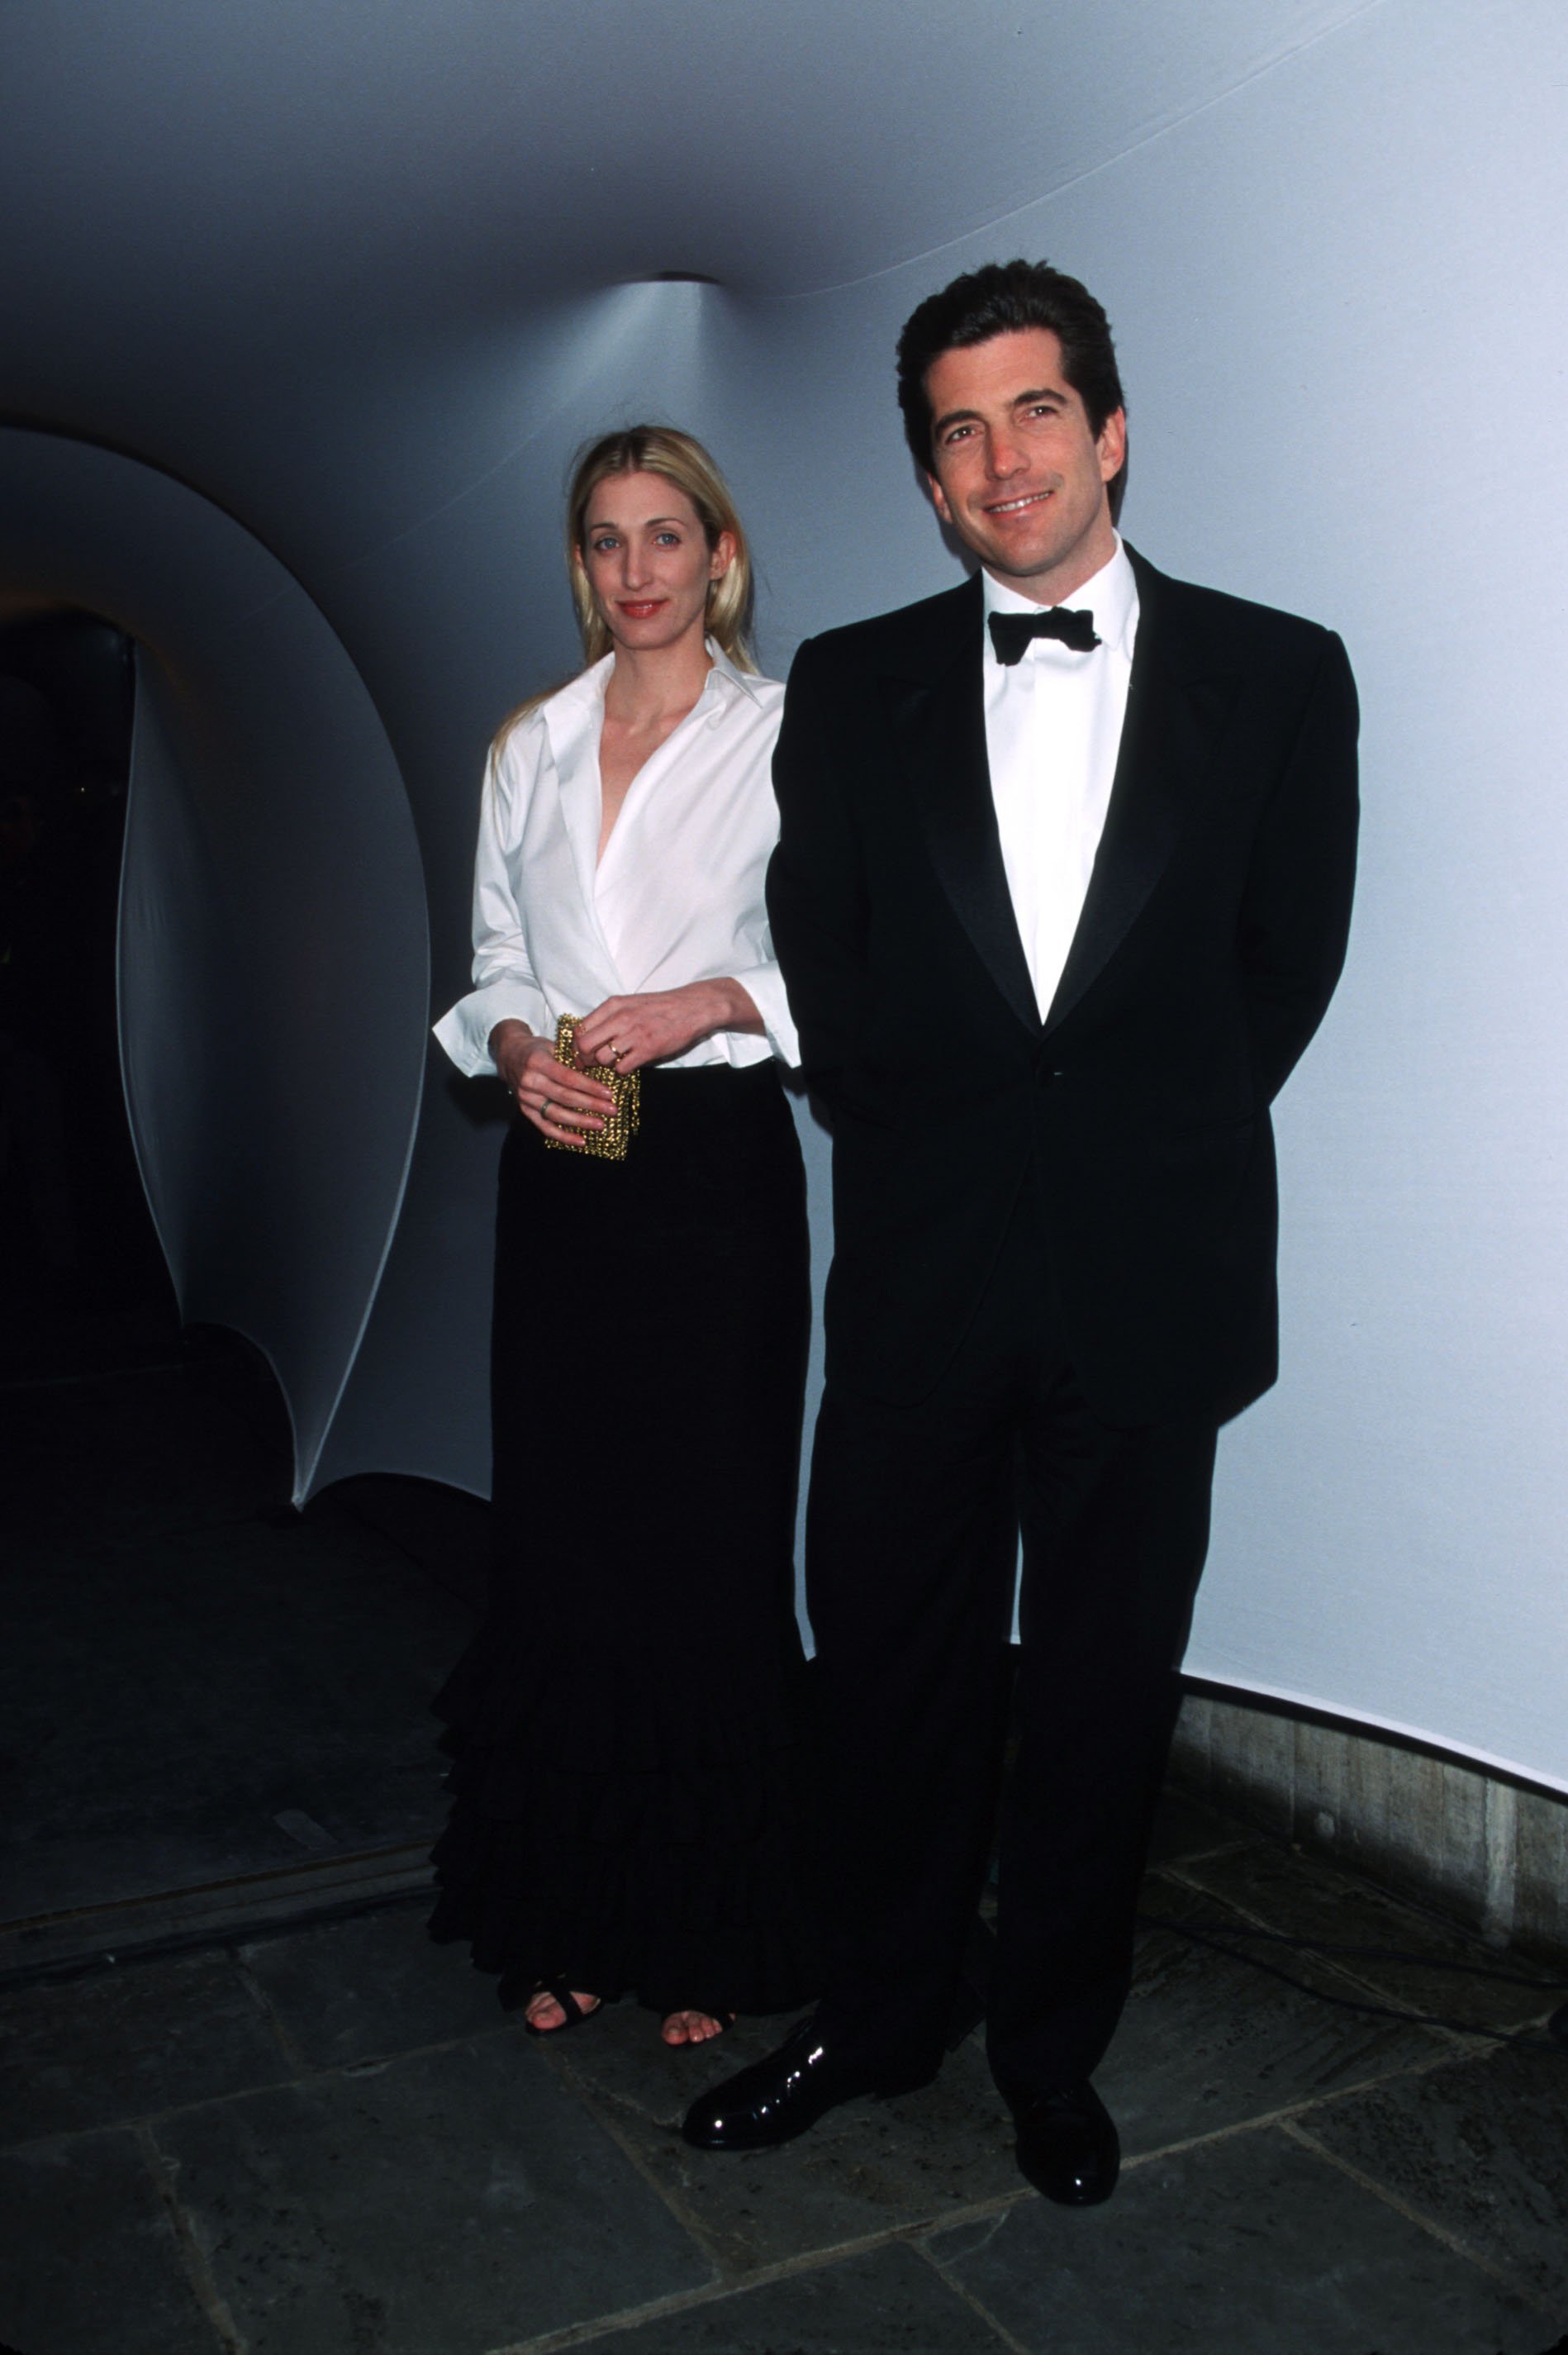 John F. Kennedy Jr. with Carolyn Bessette-Kennedy pictured wearing coordinating black and white outfits in 1995. / Source: Getty Images